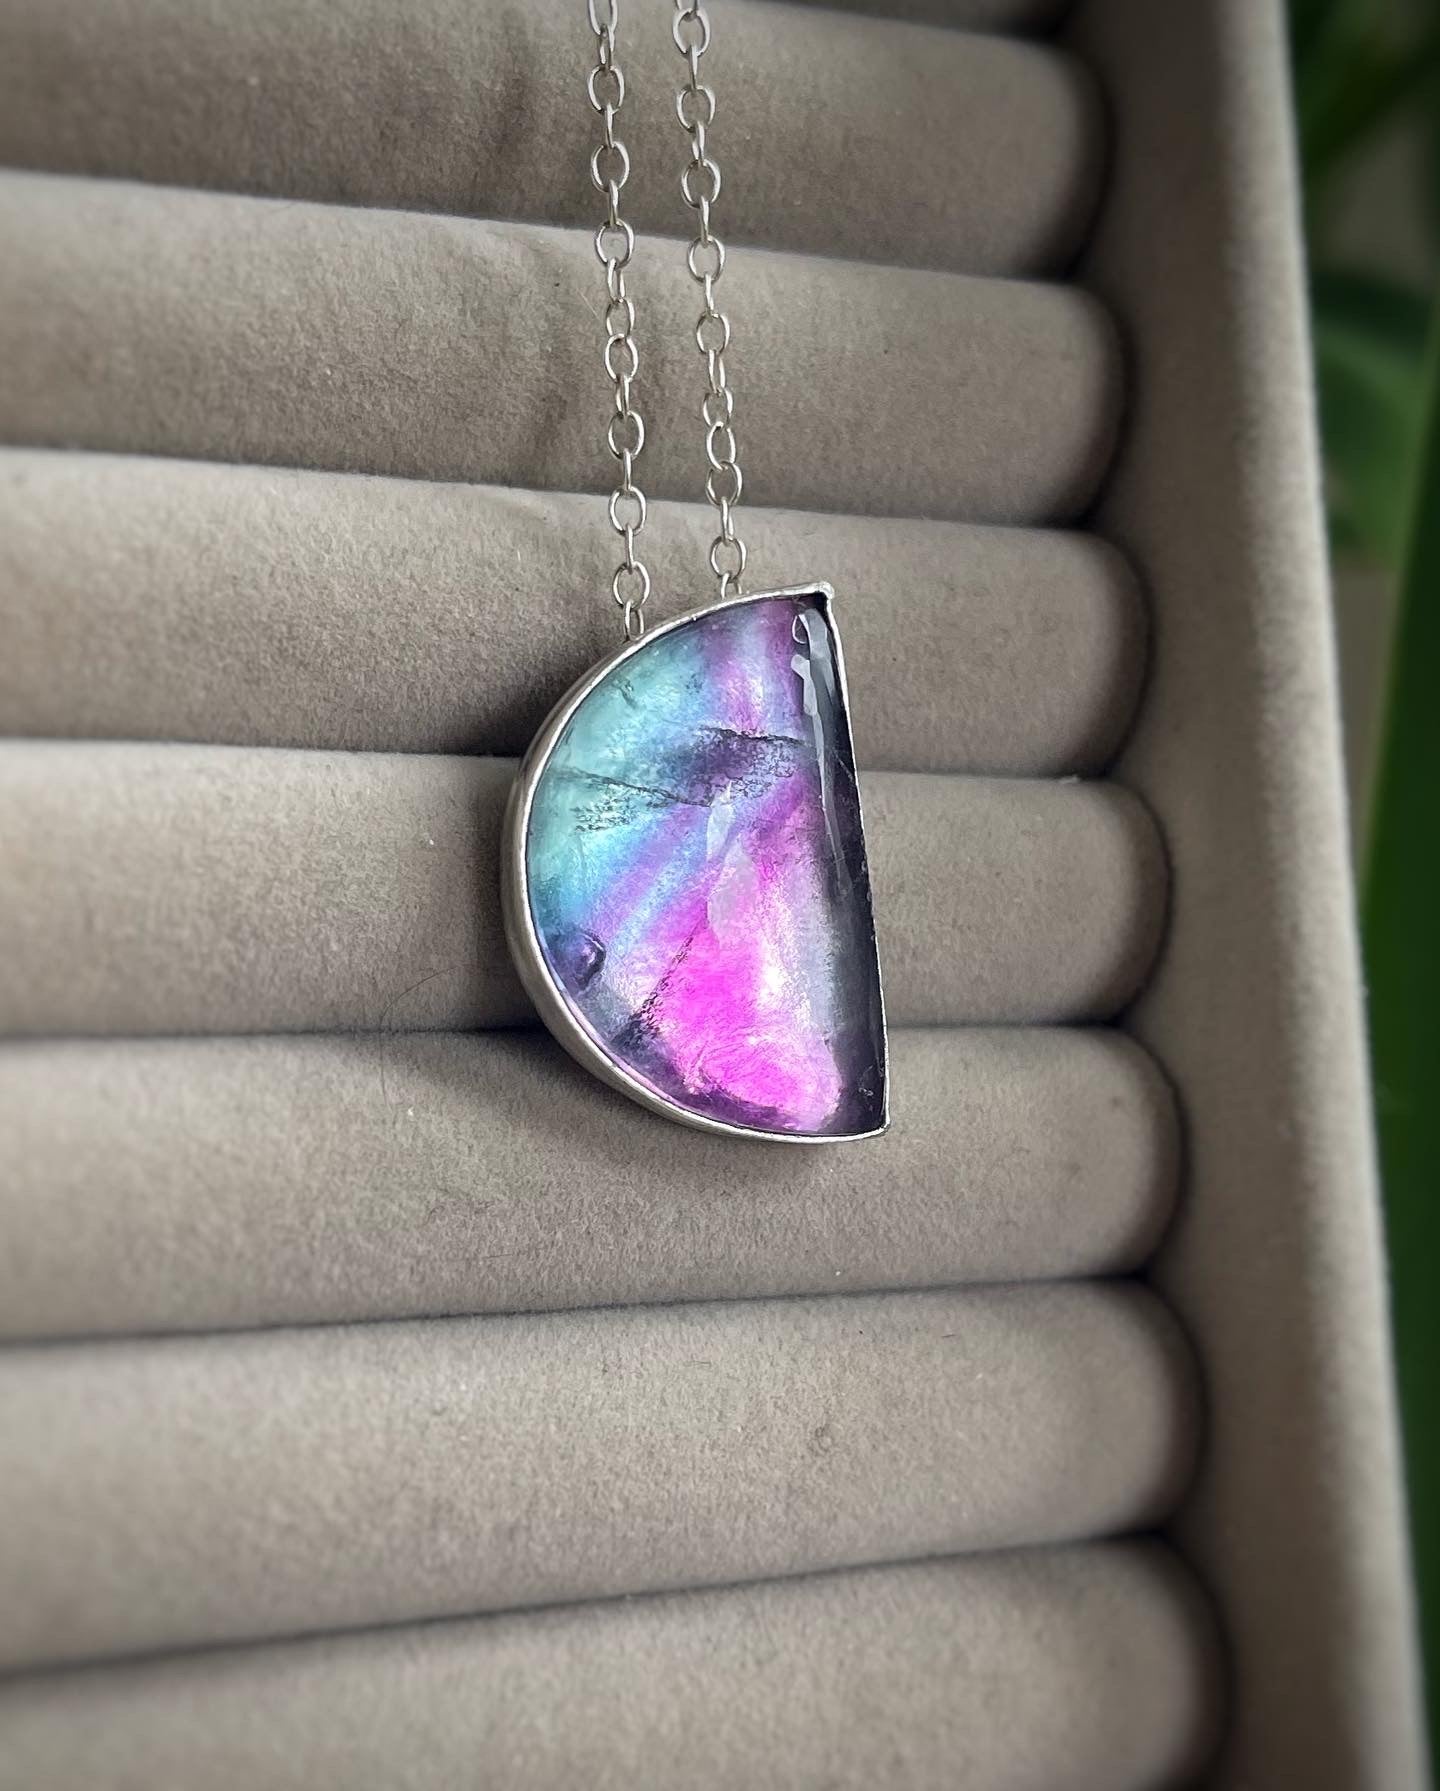 Purple, blue and pink fluorite necklace in sterling silver hanging on a background of a jewellery tray